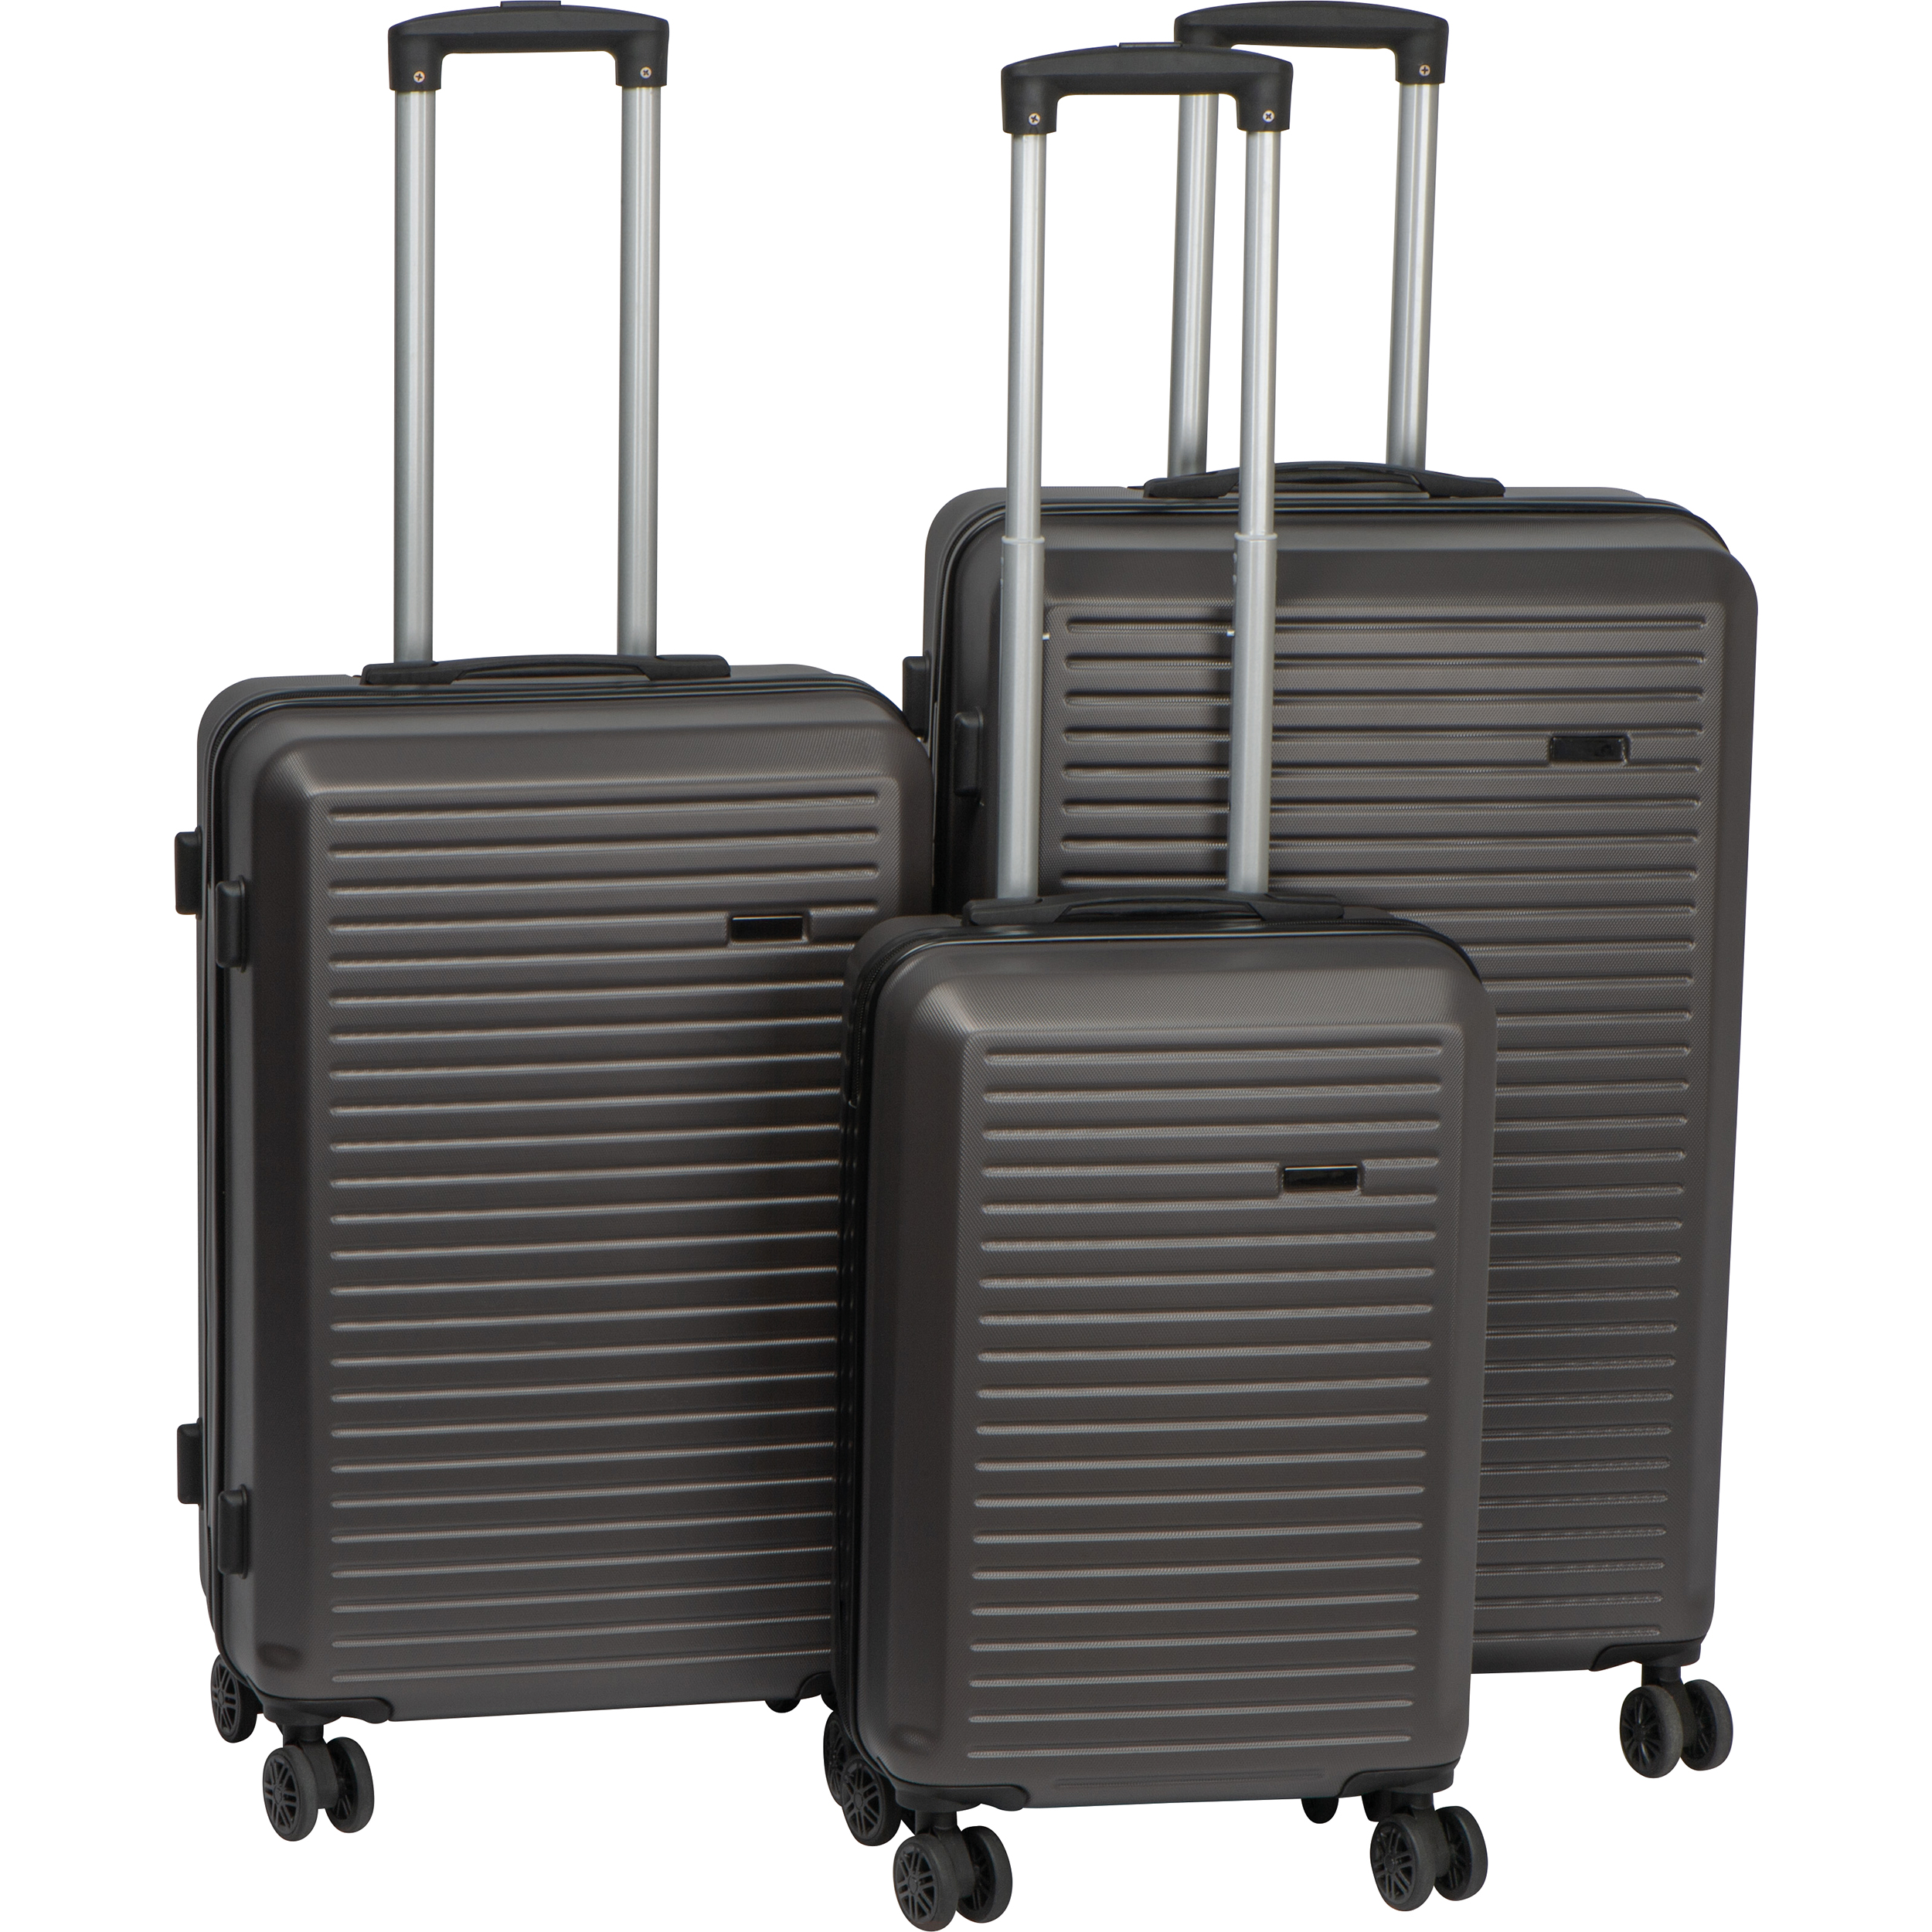 Set of 3 suitcases - Cowden